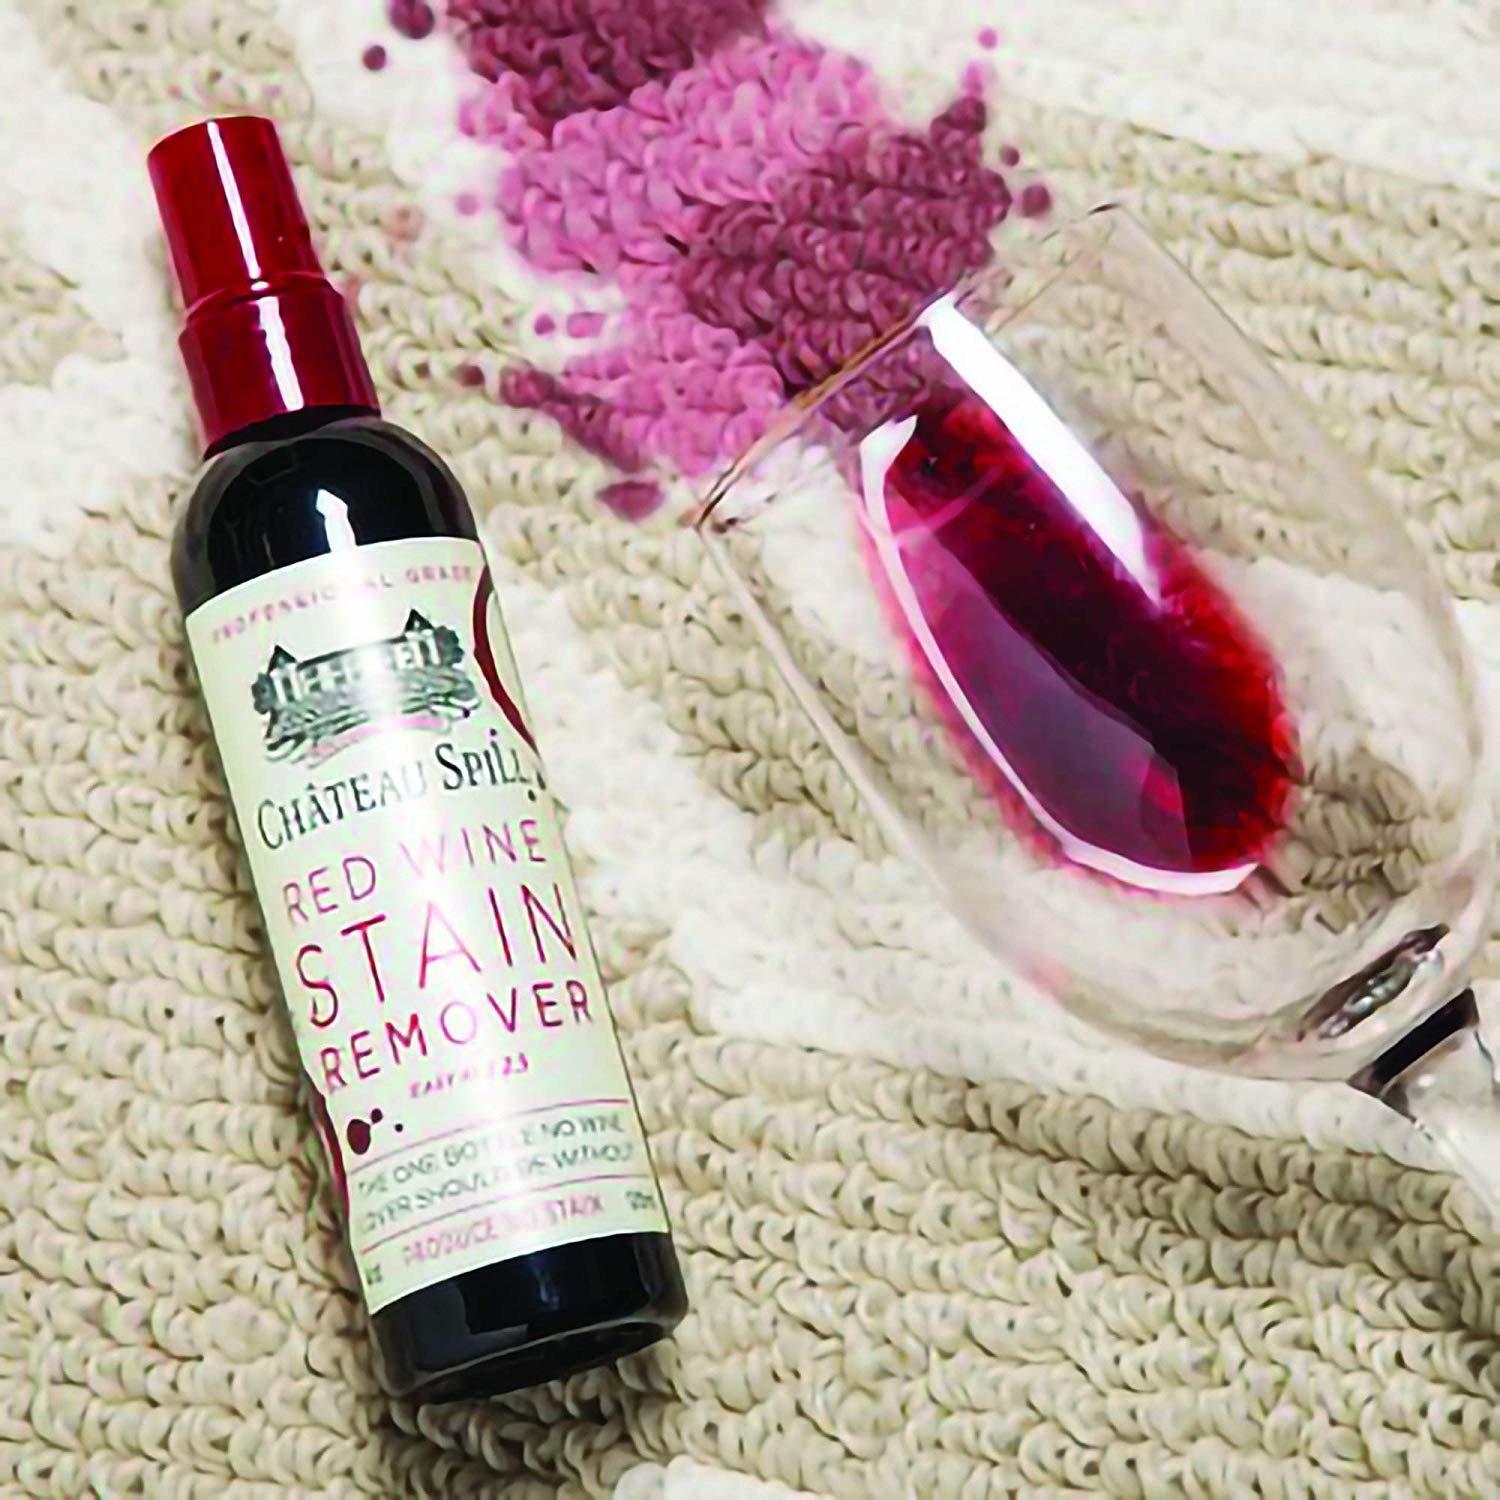 The bottle of red wine stain remover sitting on the carpet next to a spilled red wine glass